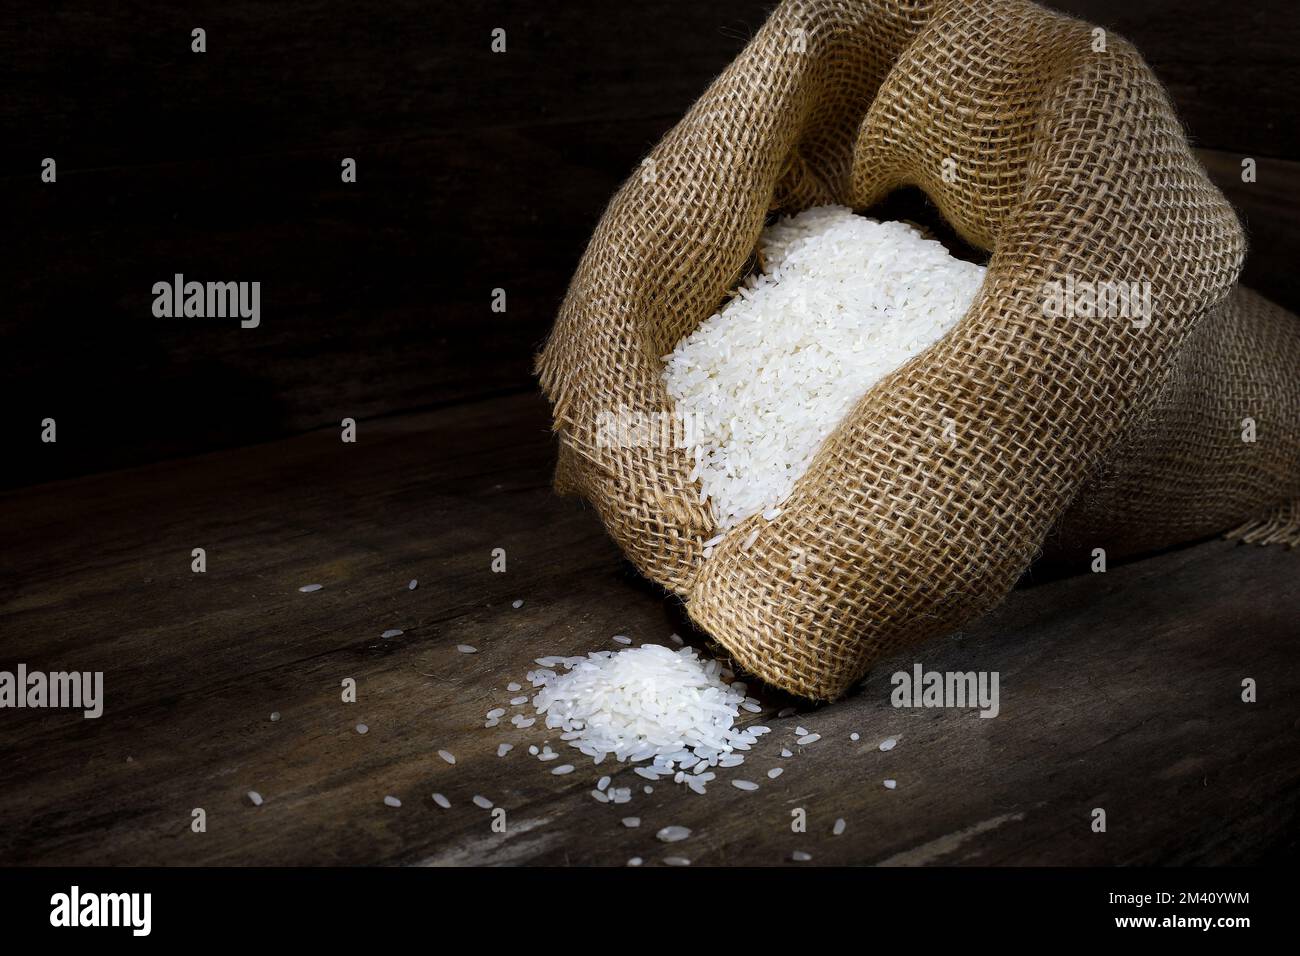 A rustic scene of a hessian bag overflowing with long grain White Rice on a wooden box-like surrounding in dark mood lighting; captured in a Studio Stock Photo